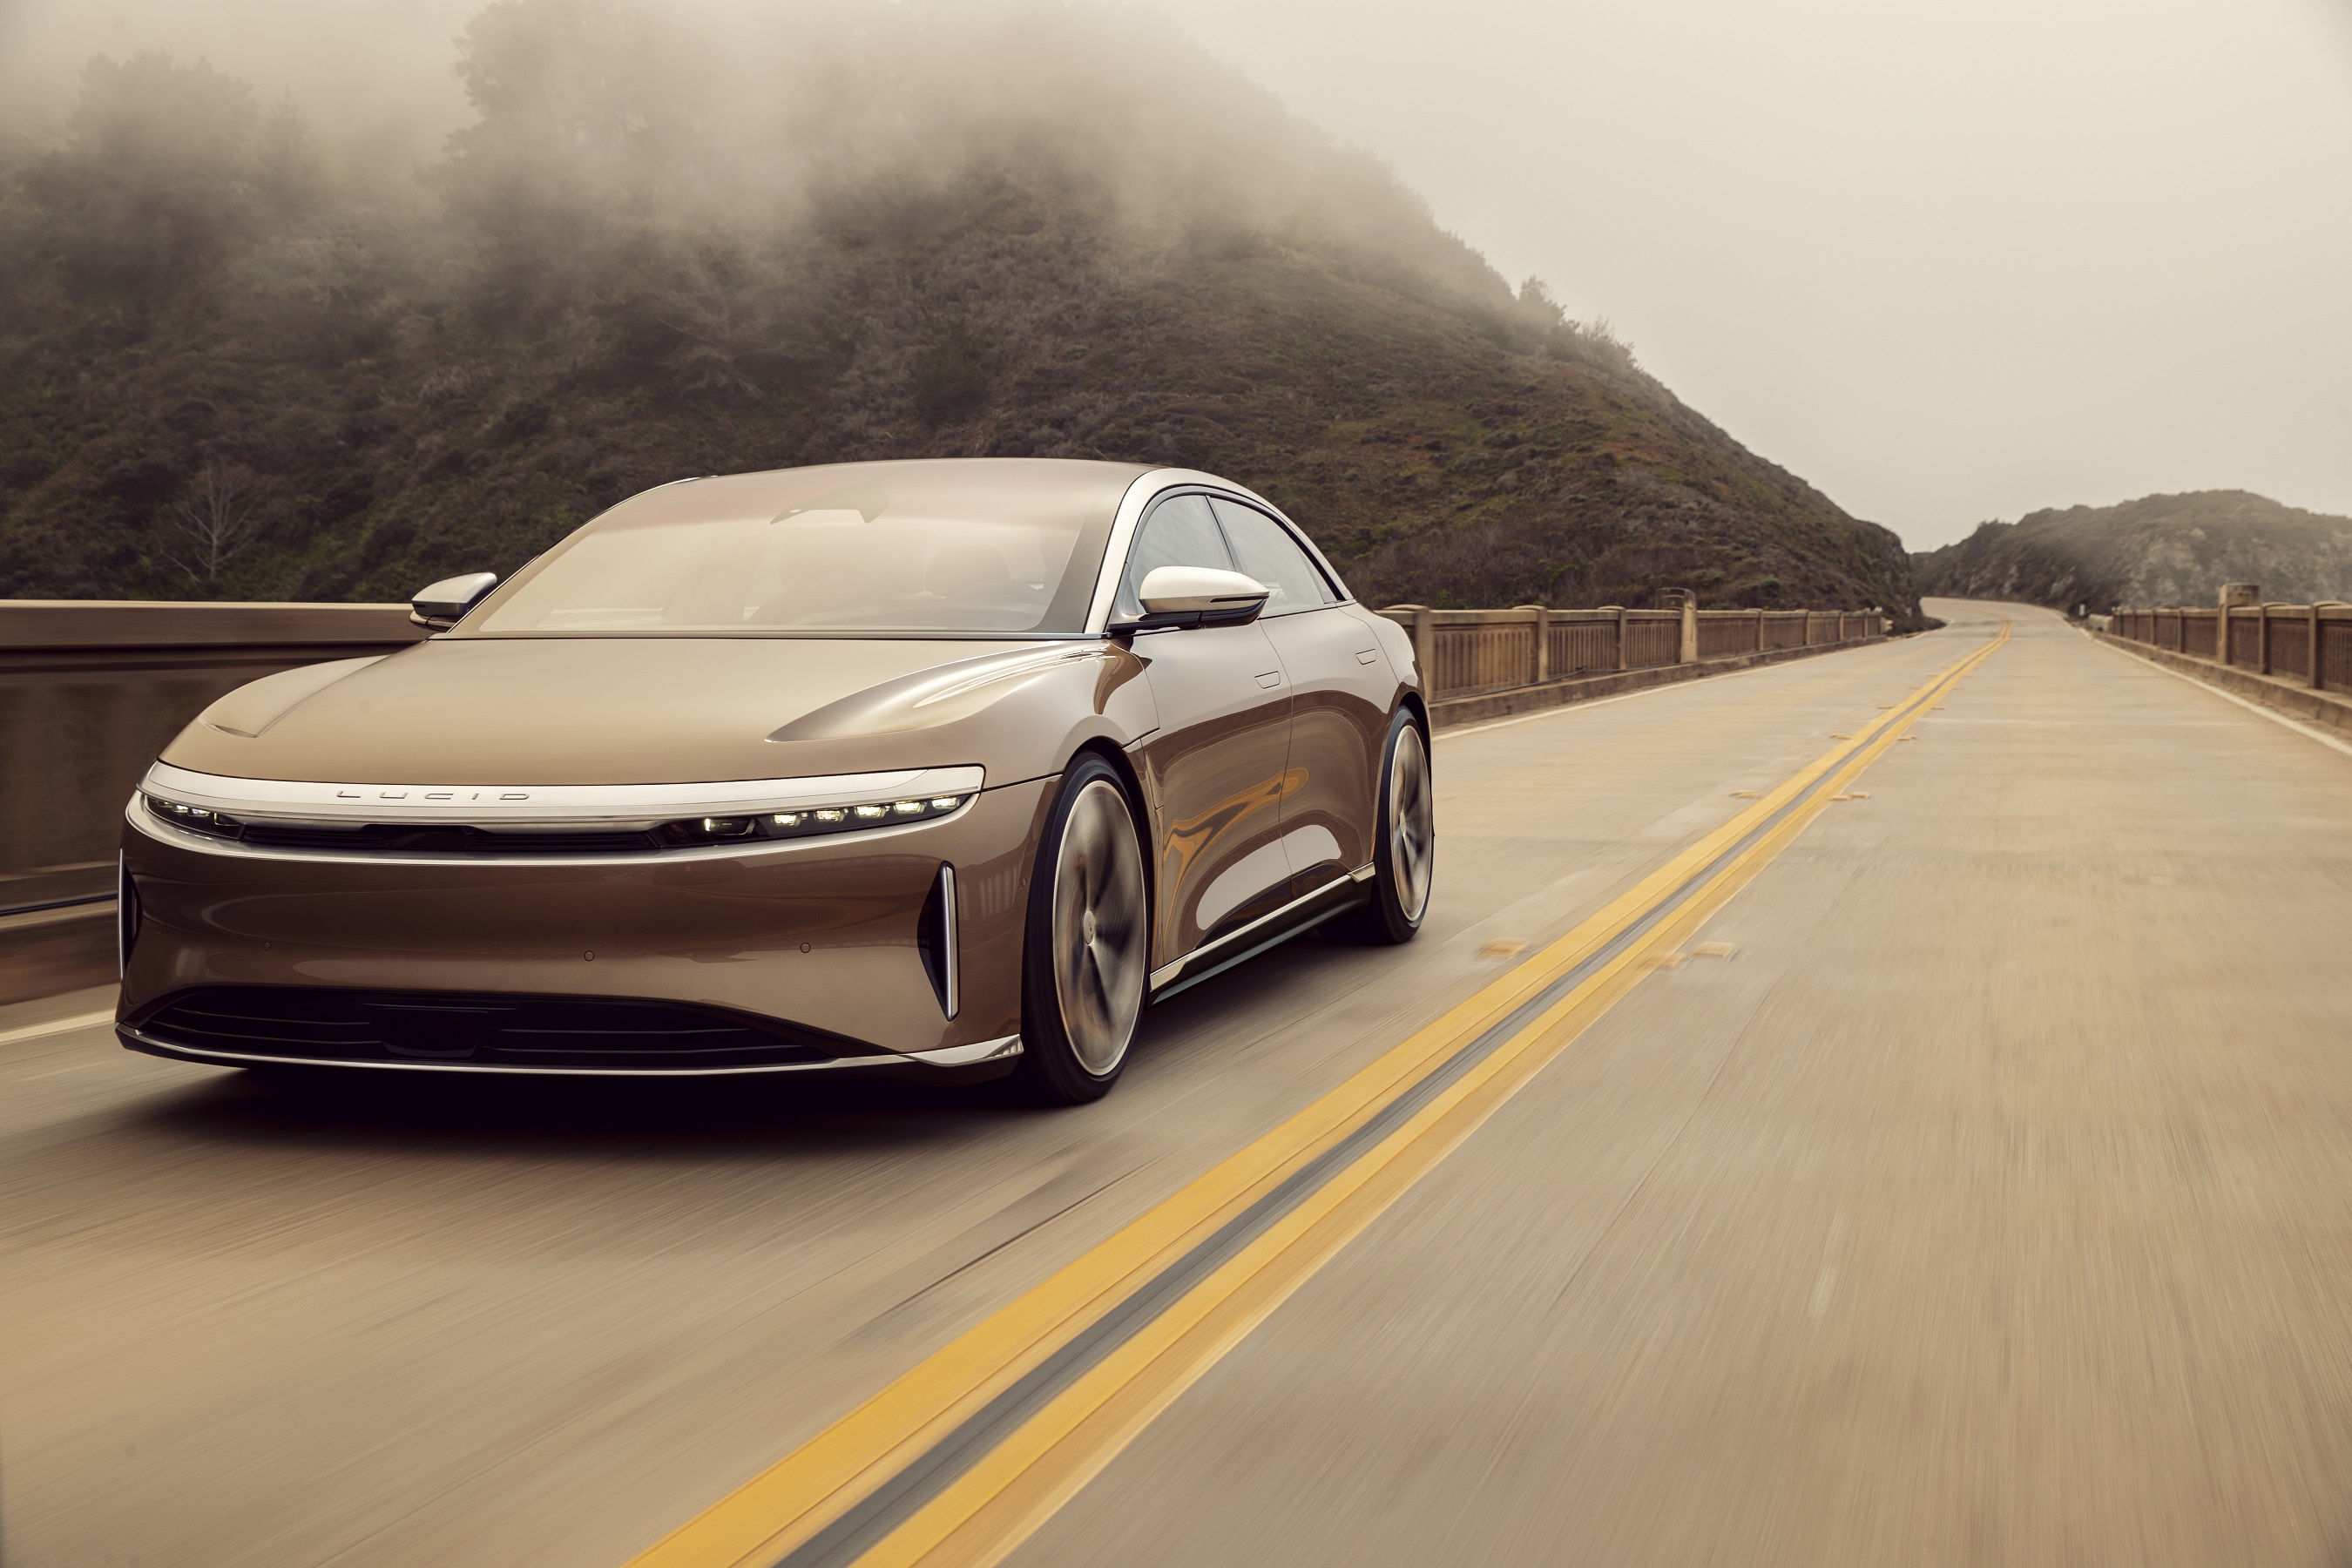 The Lucid Air, like this one, cruises down a back road.